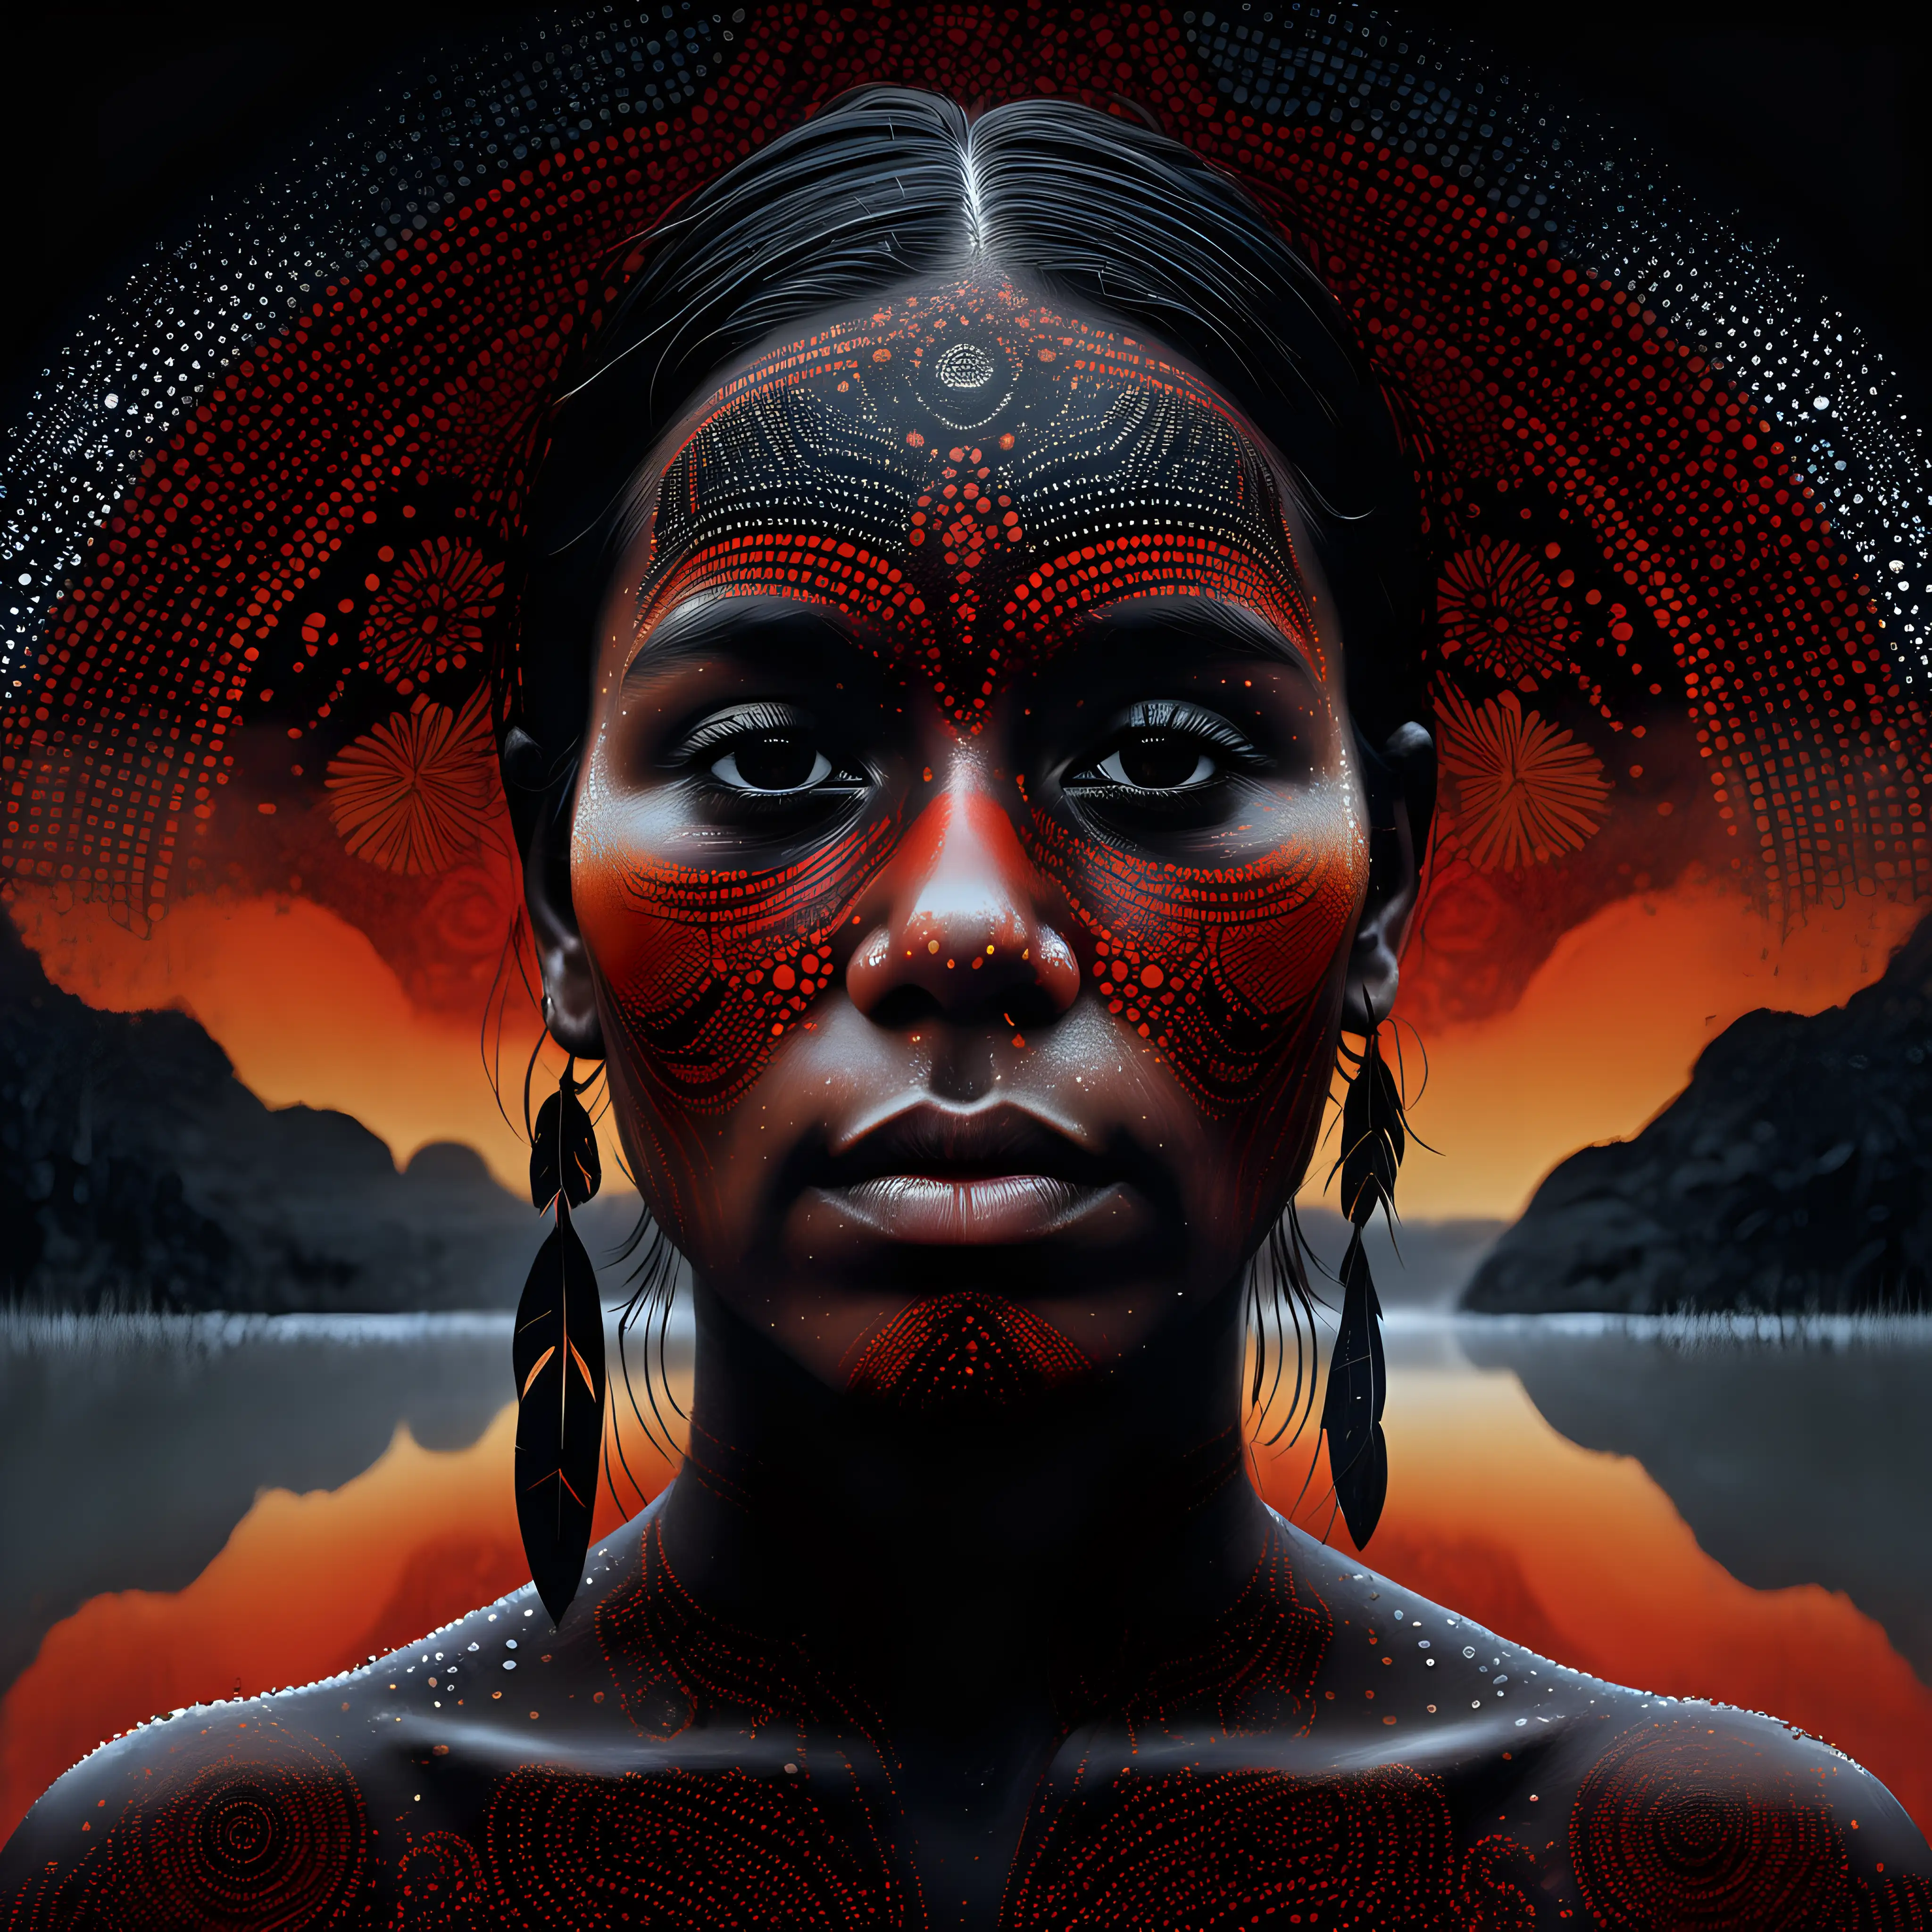 Dot Art, Indigenous Australia, double exposure portrait, Uluṟu, intricate details, internal Australian landscape featuring mist and rain, mirrored on water's surface below, colour scheme centred on black, red, ochre, against a stark black backdrop, chiaroscuro enhancing the intricate details, in a digital rendering. “-v 6”